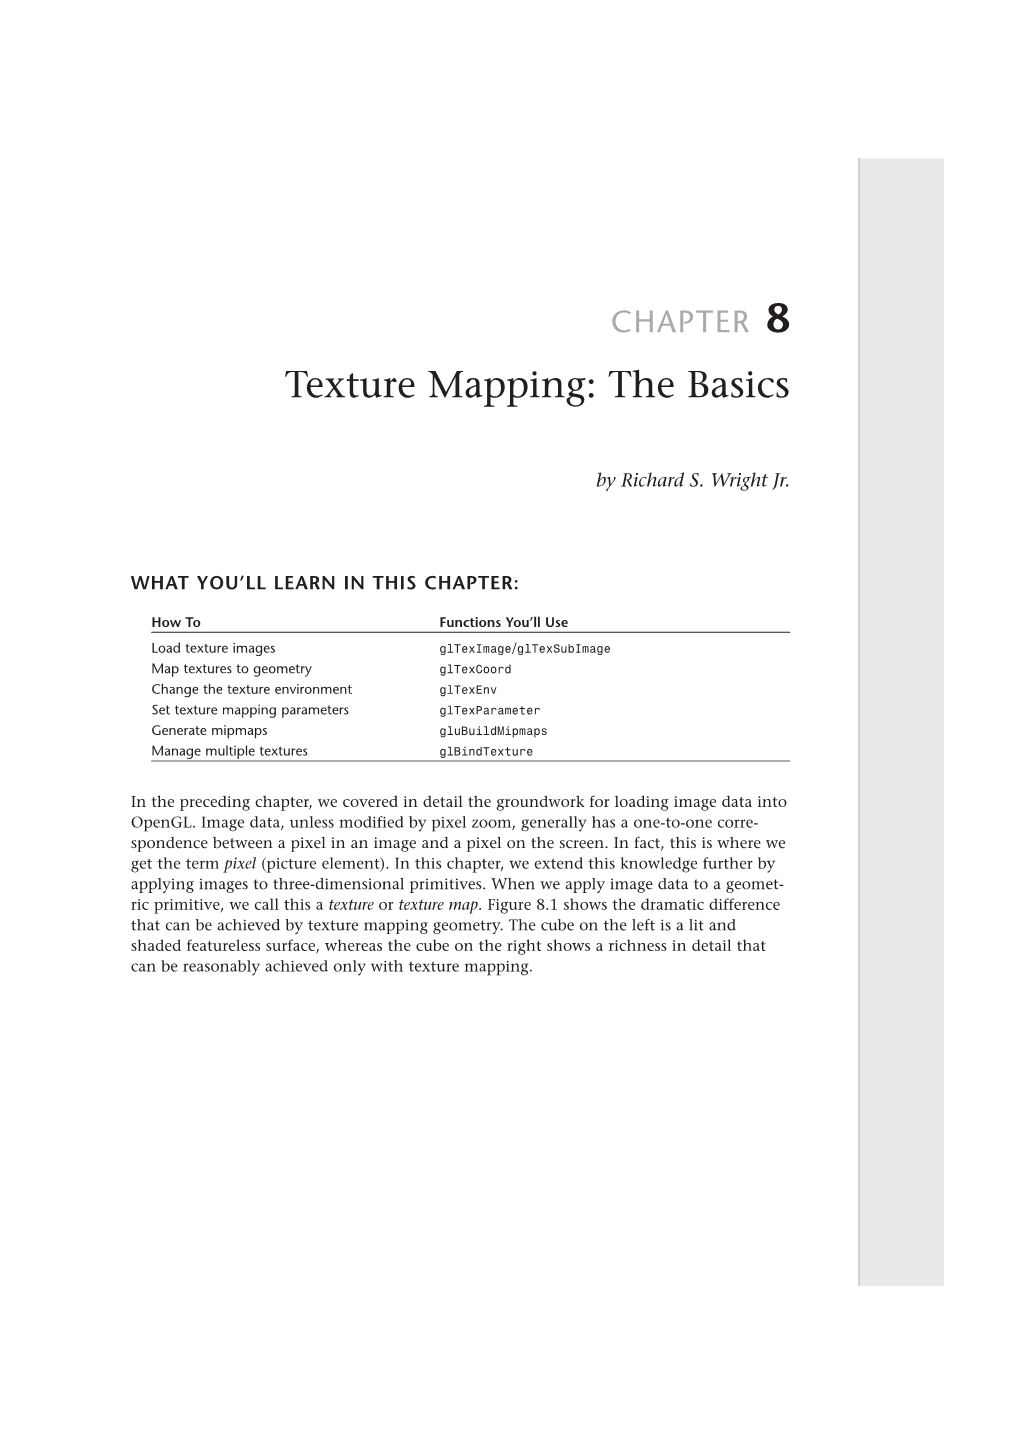 Texture Mapping: the Basics